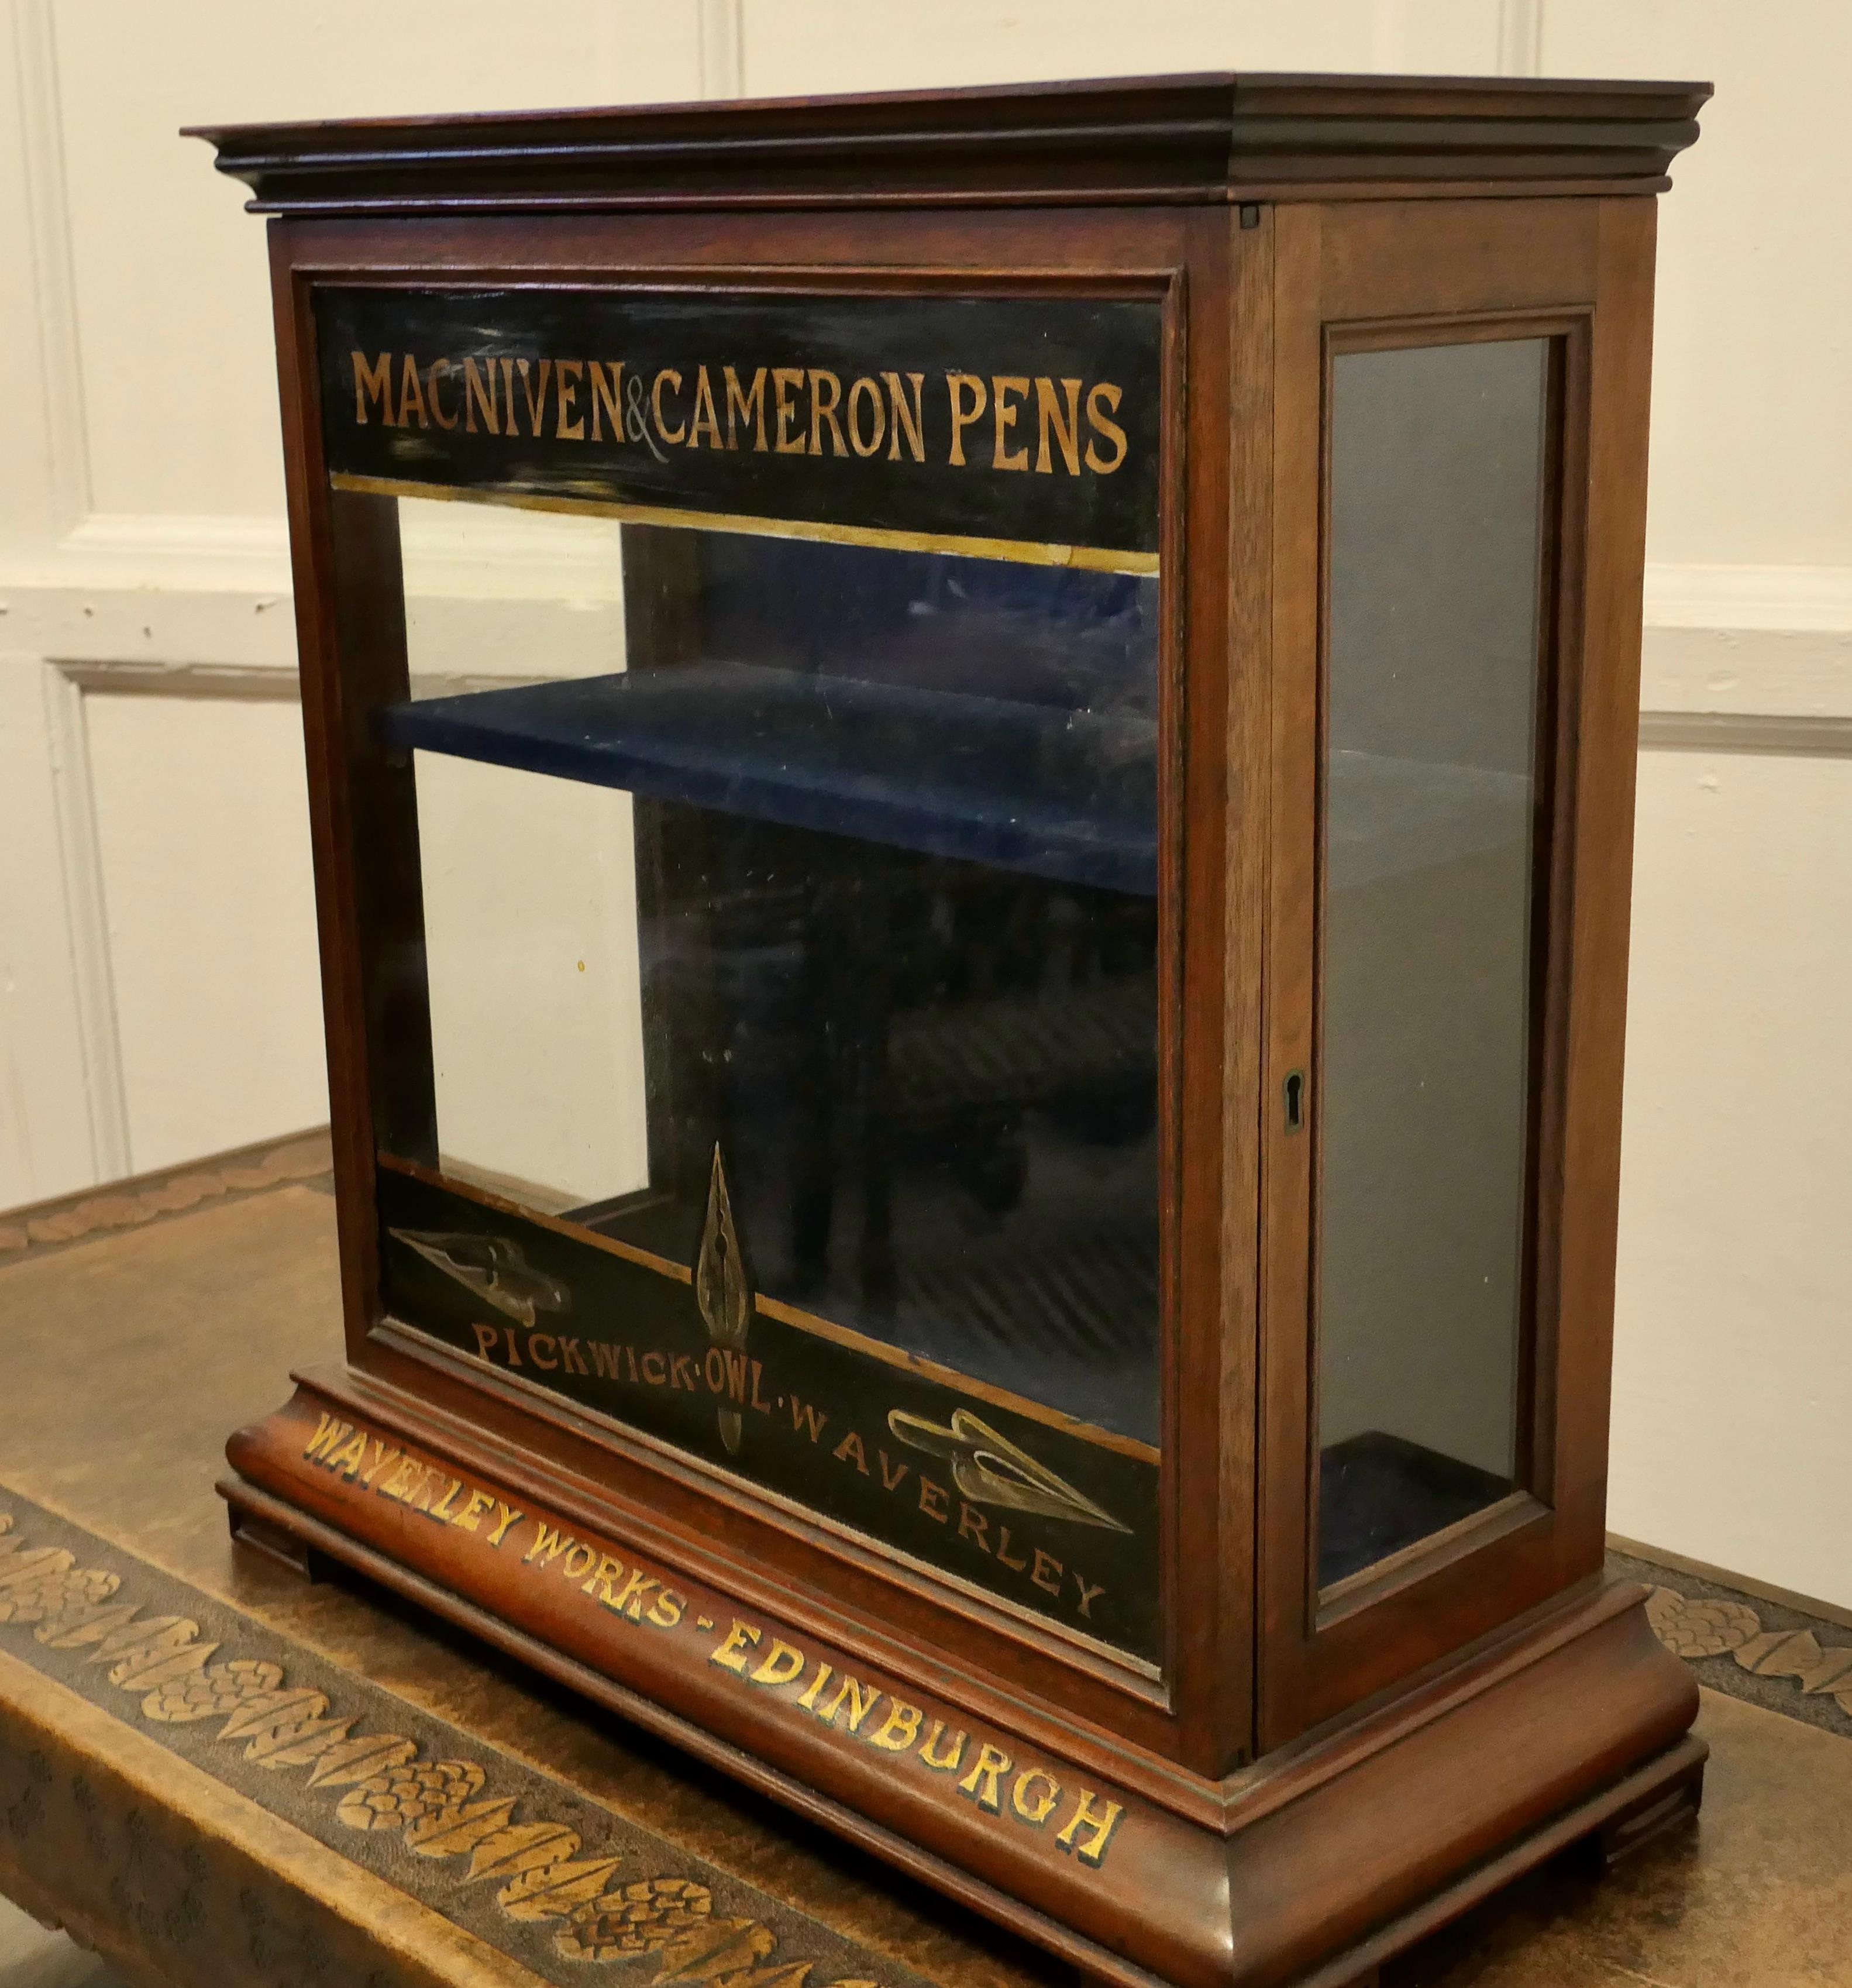 Victorian stationers cupboard, macniven & cameron pens display cabinet

A lovely piece of Victorian Shop display, this small Mahogany Counter top cupboard is from Scotland’s MACNIVEN AND CAMERON’S PEN COMPANY, Waverley Works Edinburgh 
The